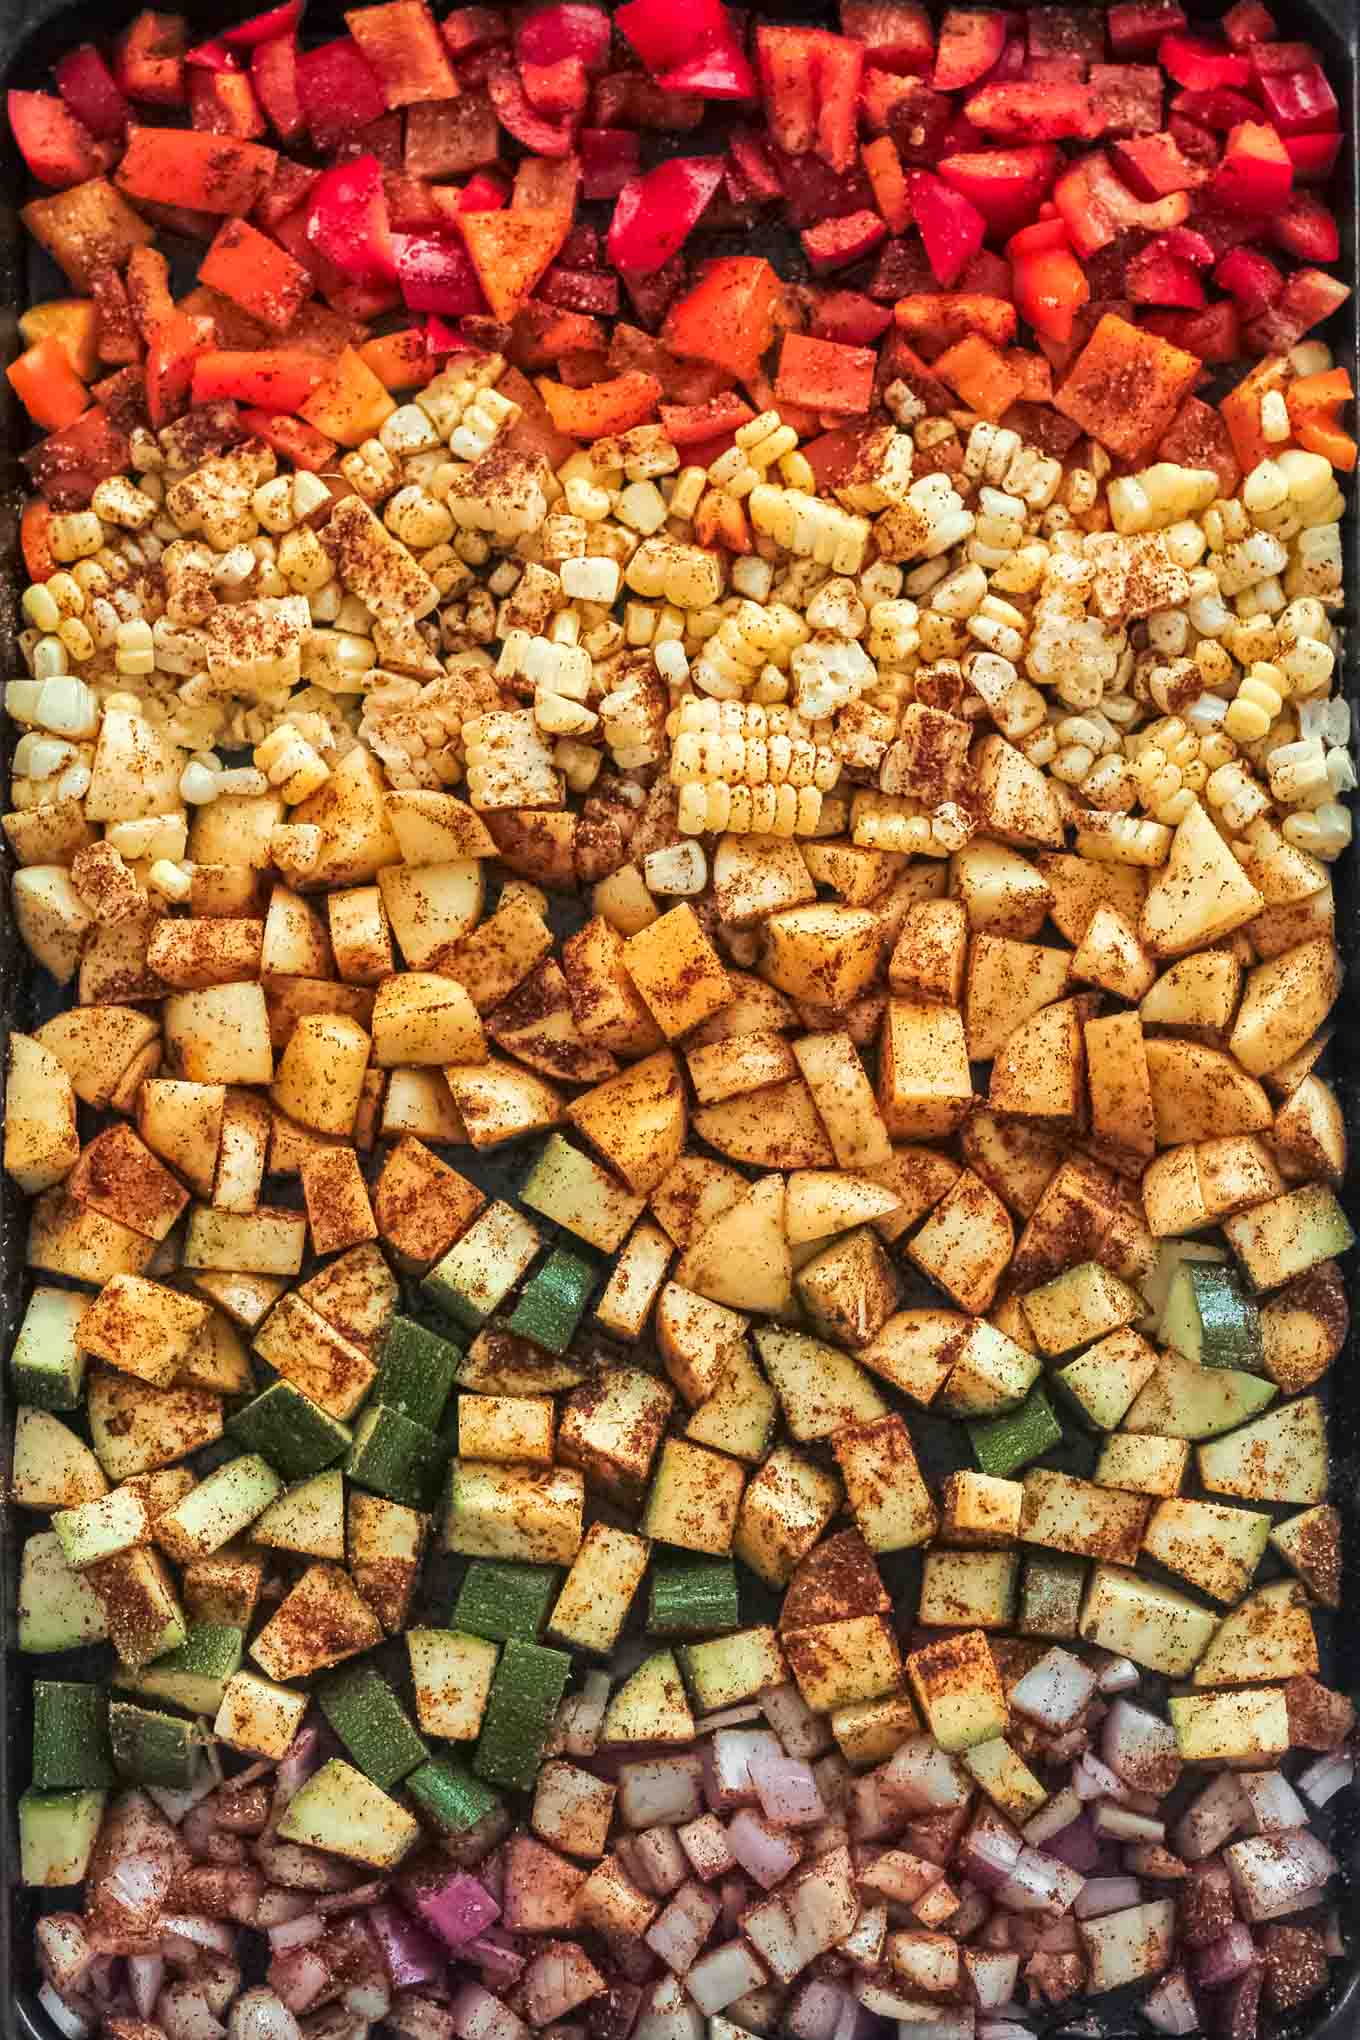 The sheet pan of peppers, zucchini, corn, and potatoes before roasting